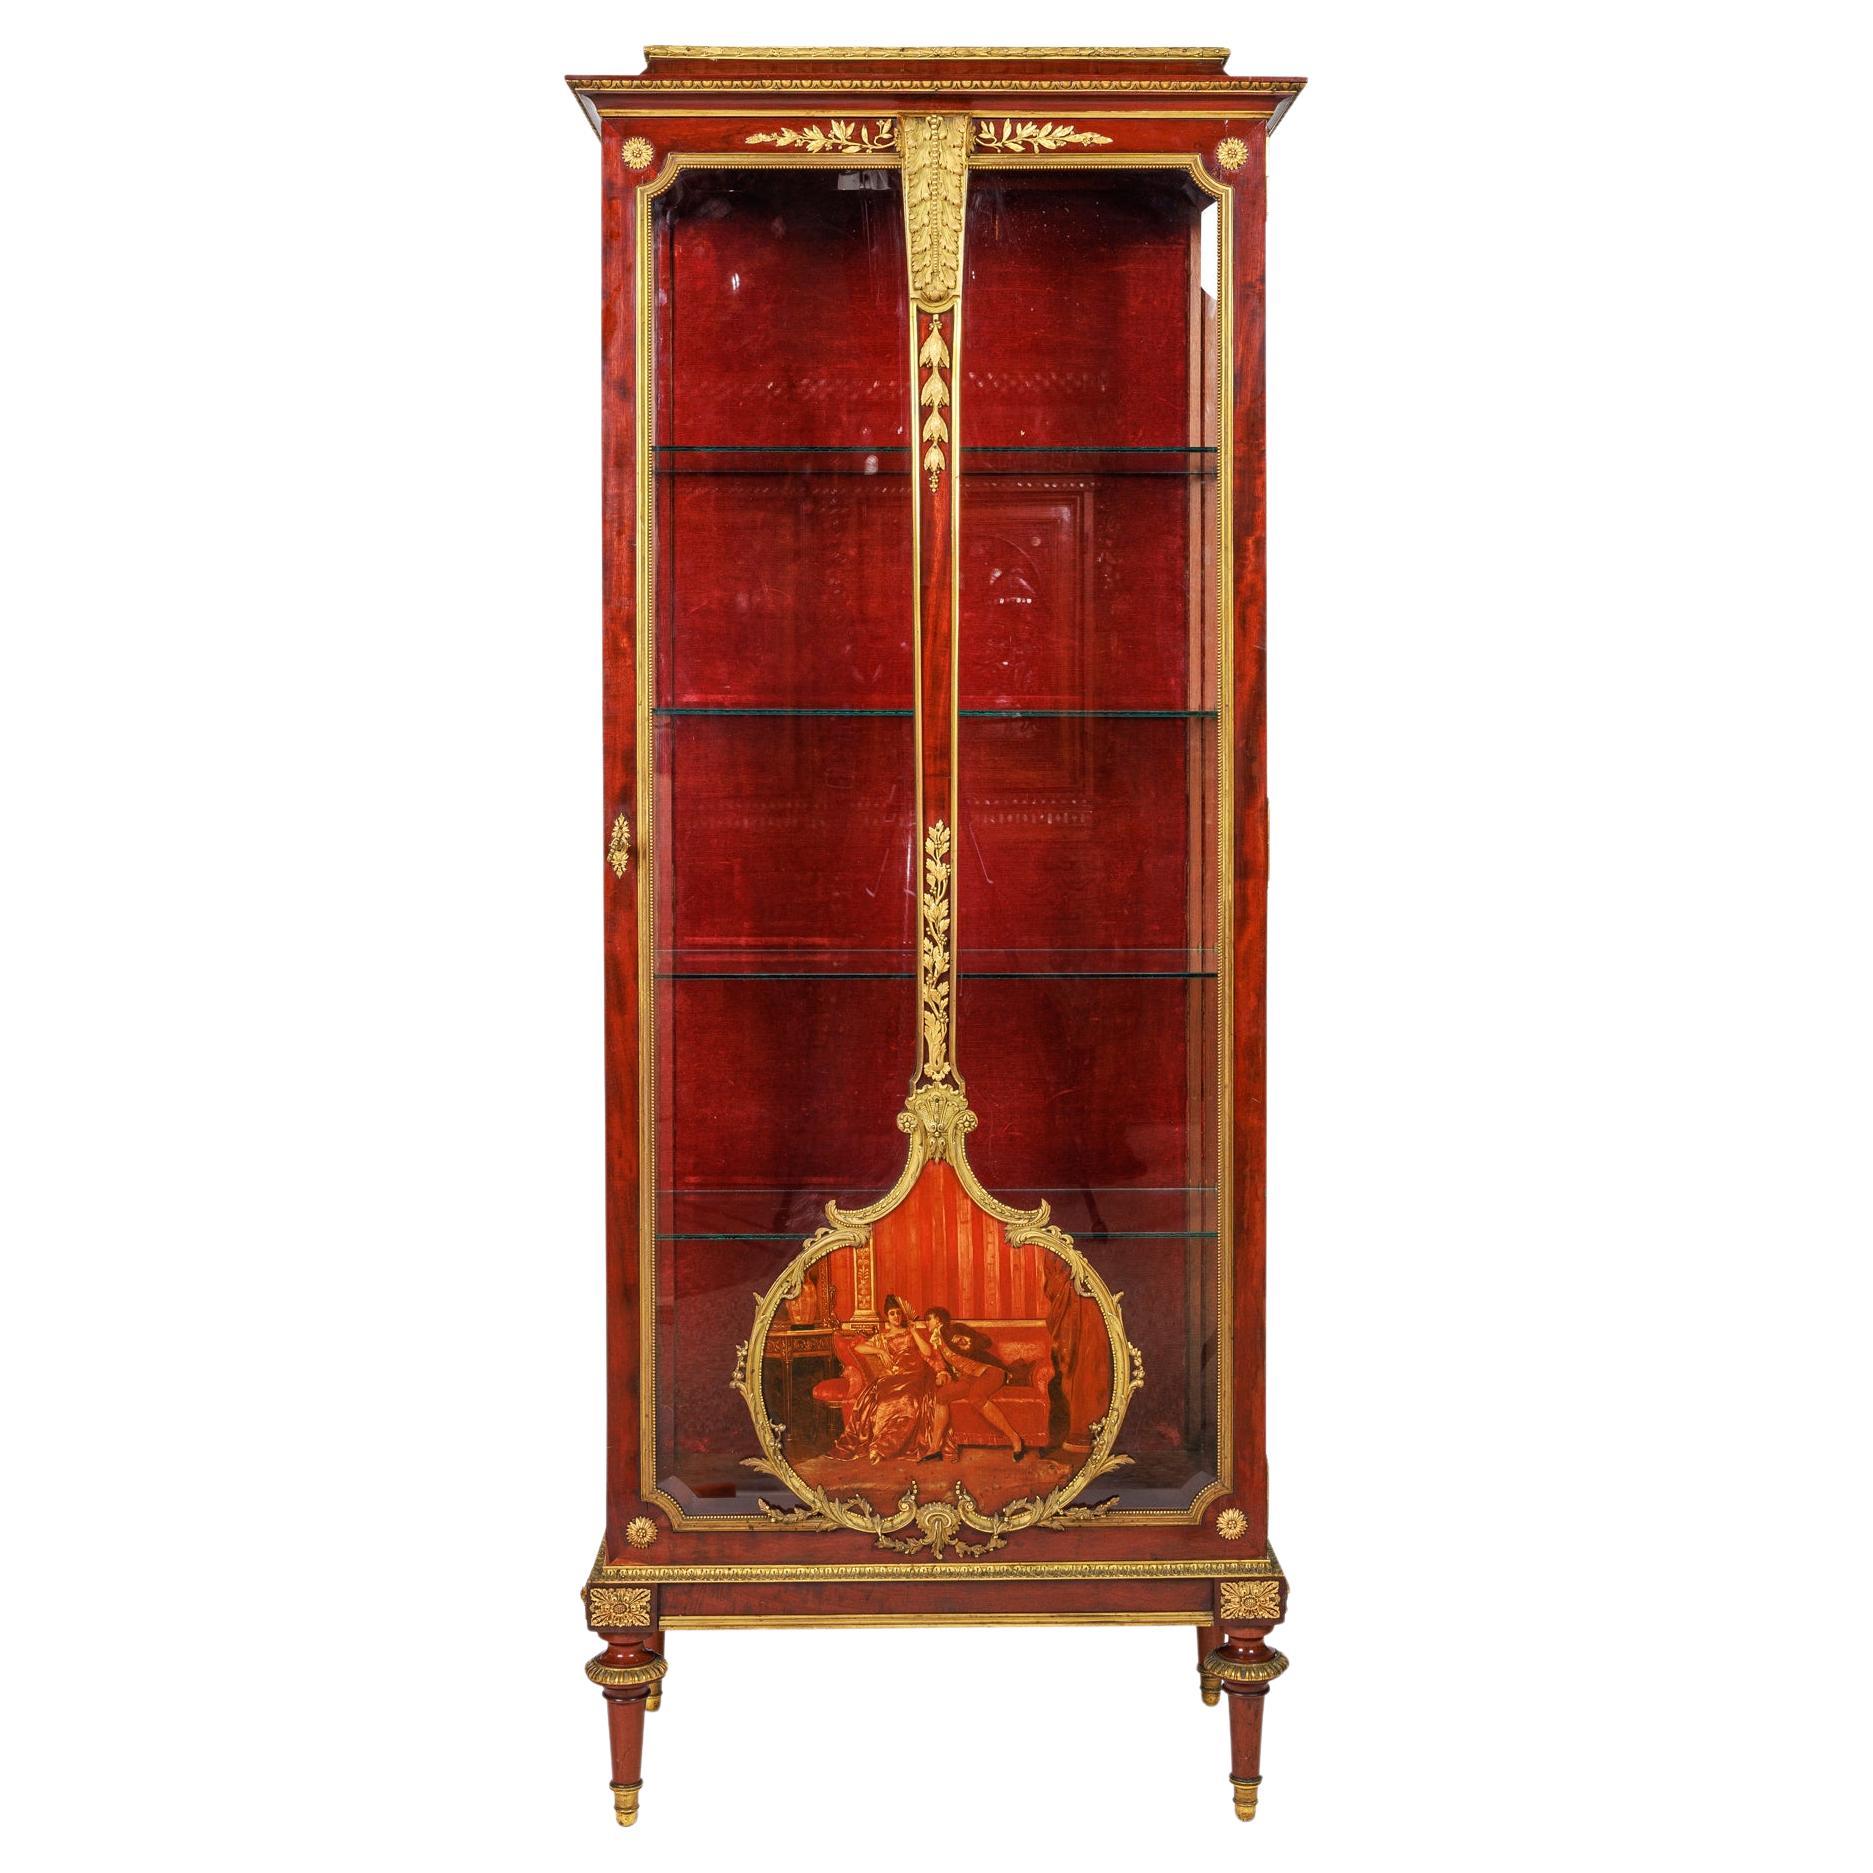 Louis Majorelle, an Exceptional Quality French Ormolu and Vernis Martin Vitrine